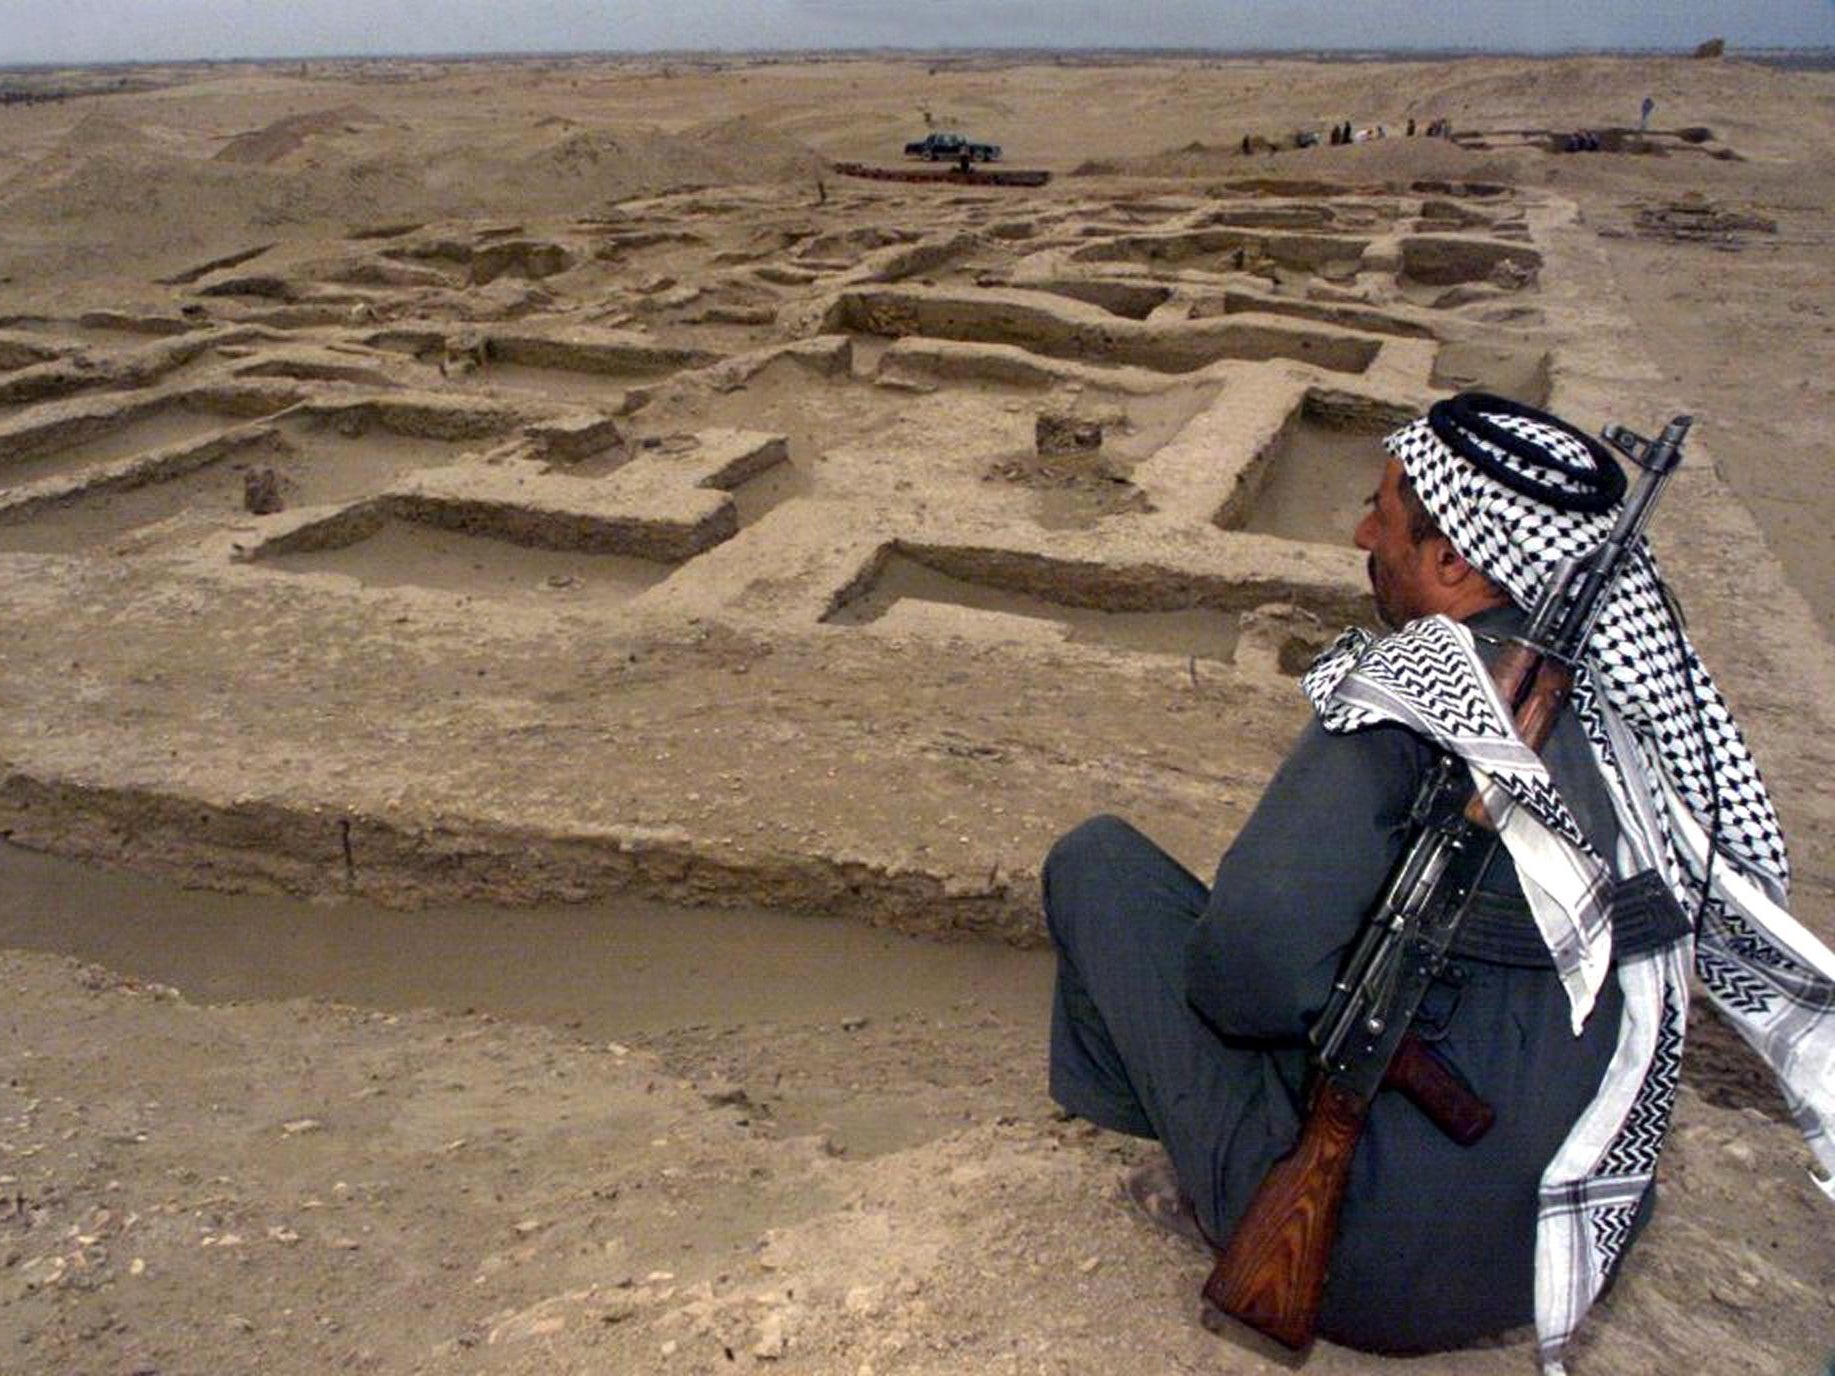 An armed Iraqi guard keeps an eye on a newly-discovered ancient Sumerian site in Um Alkarab